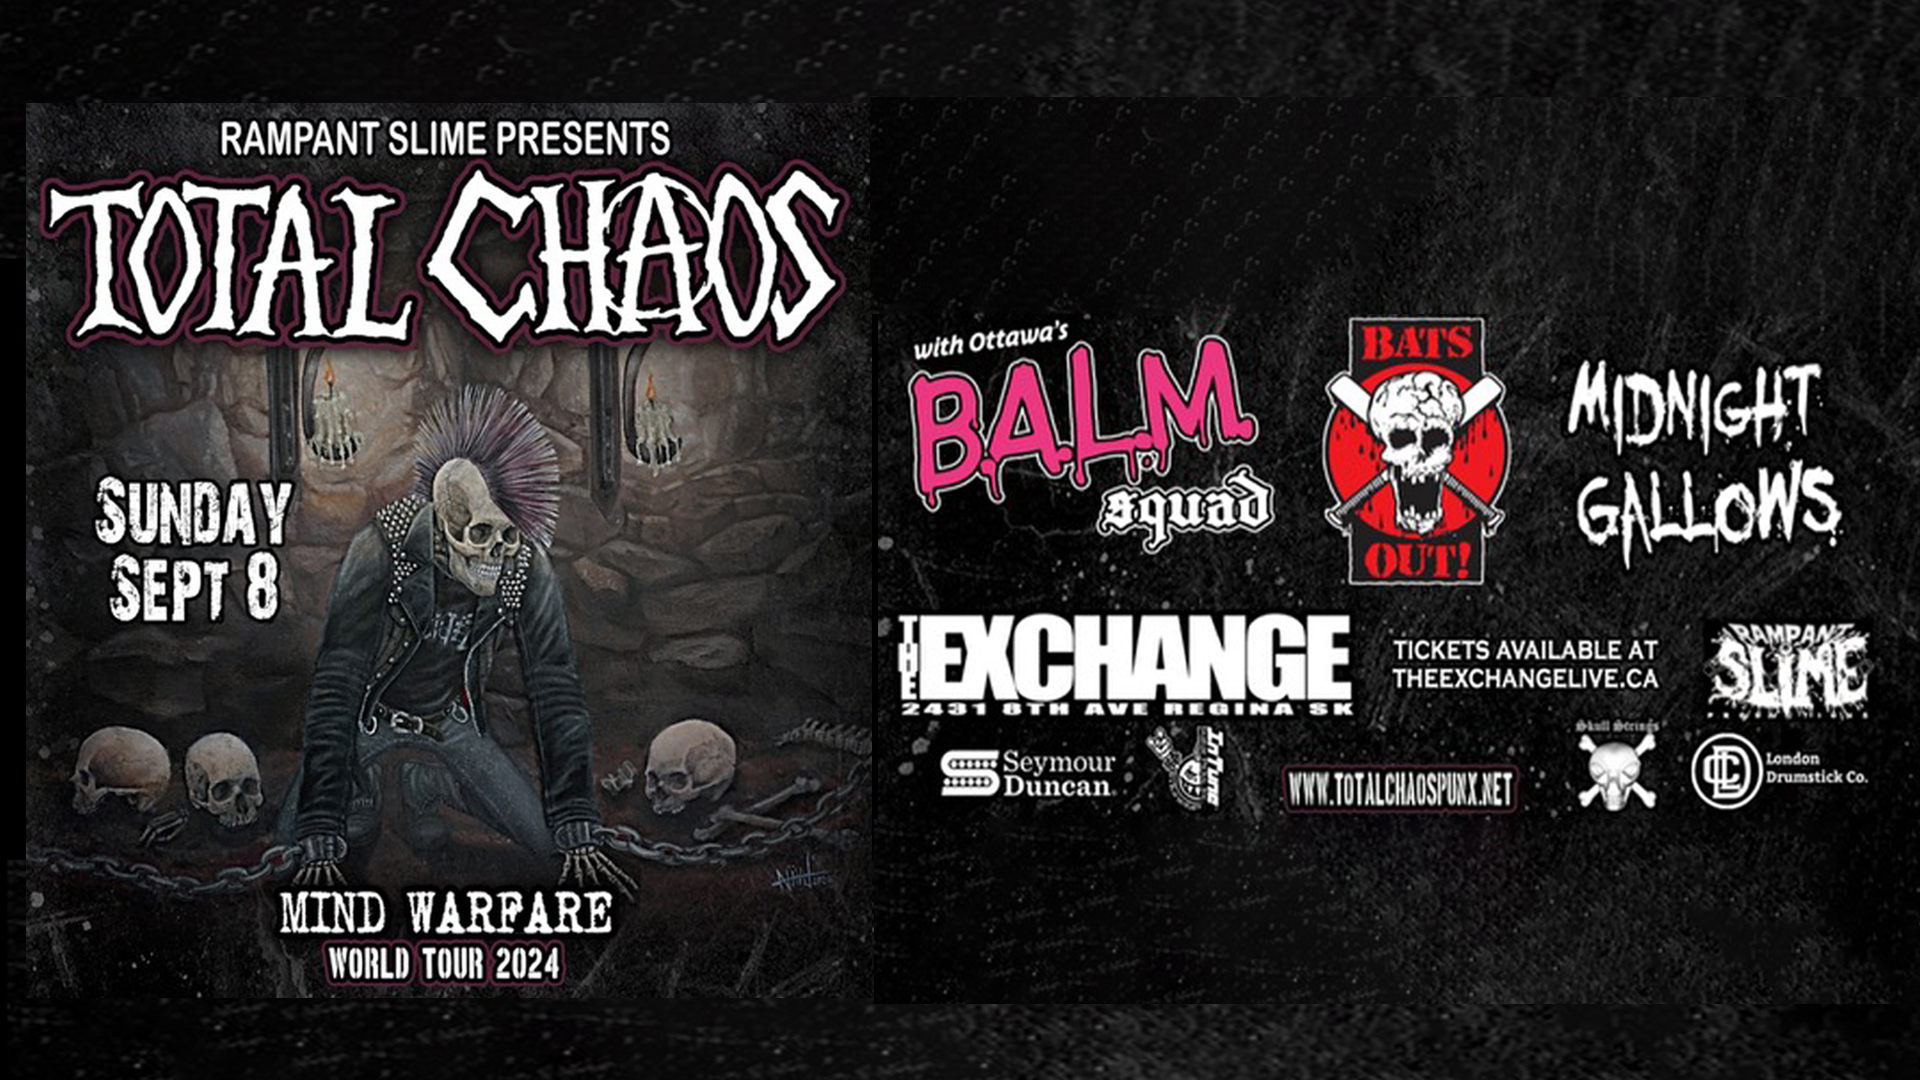 Total Chaos, Balm Squad, Bats Out!, Midnight Gallows 